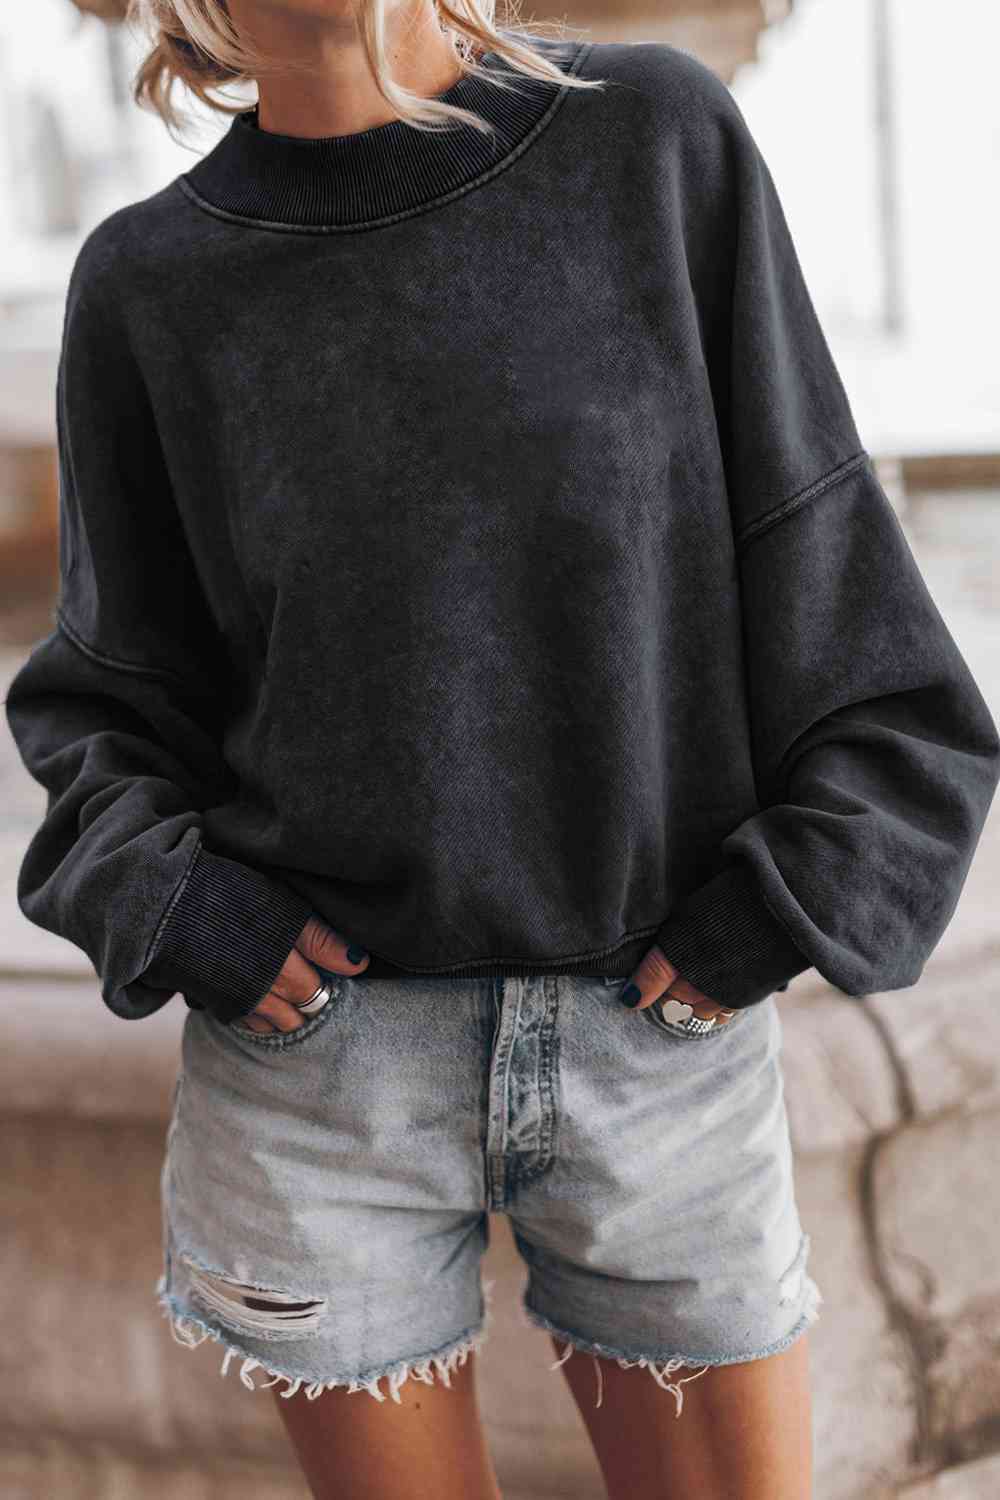 Round Neck Dropped Shoulder Sweatshirt Print on any thing USA/STOD clothes